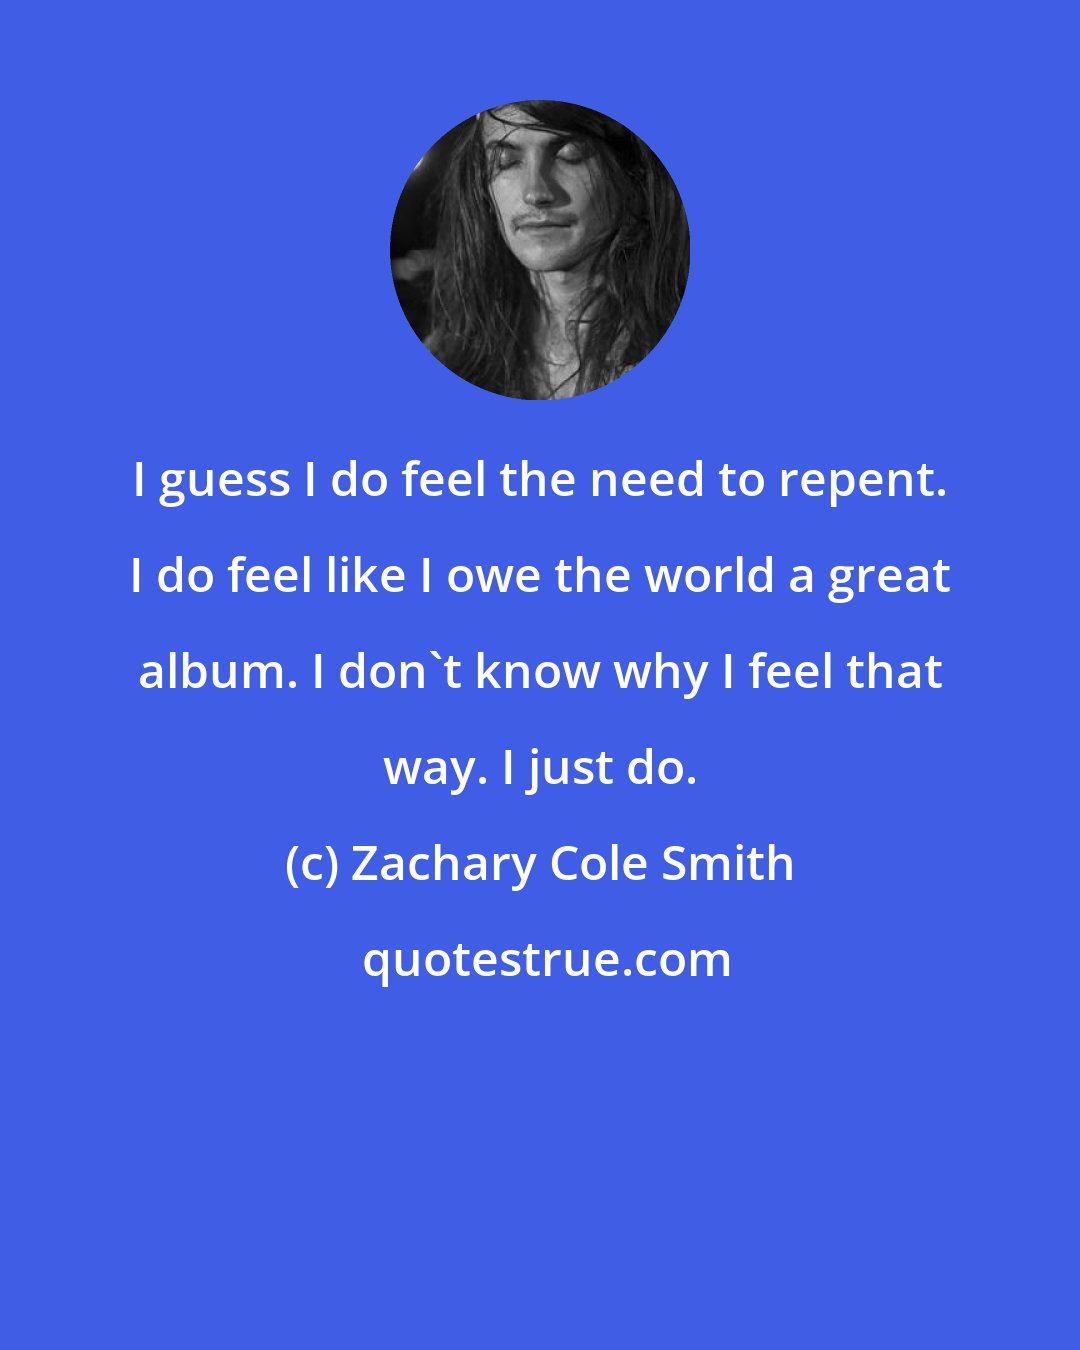 Zachary Cole Smith: I guess I do feel the need to repent. I do feel like I owe the world a great album. I don't know why I feel that way. I just do.